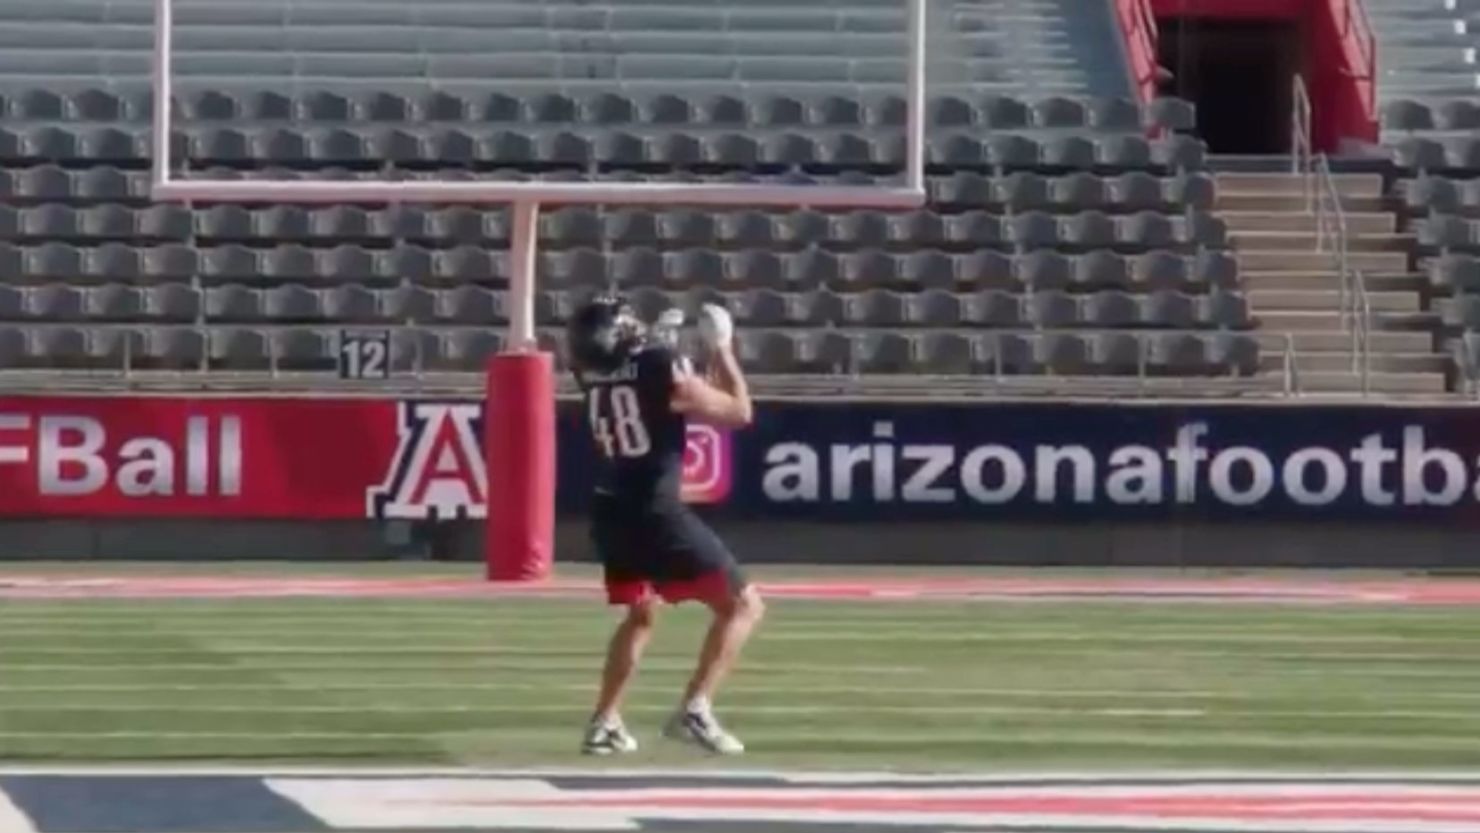 Arizona football alum Gronkowski sets a world record by catching a pass dropped from a helicopter 600 feet in the air. 